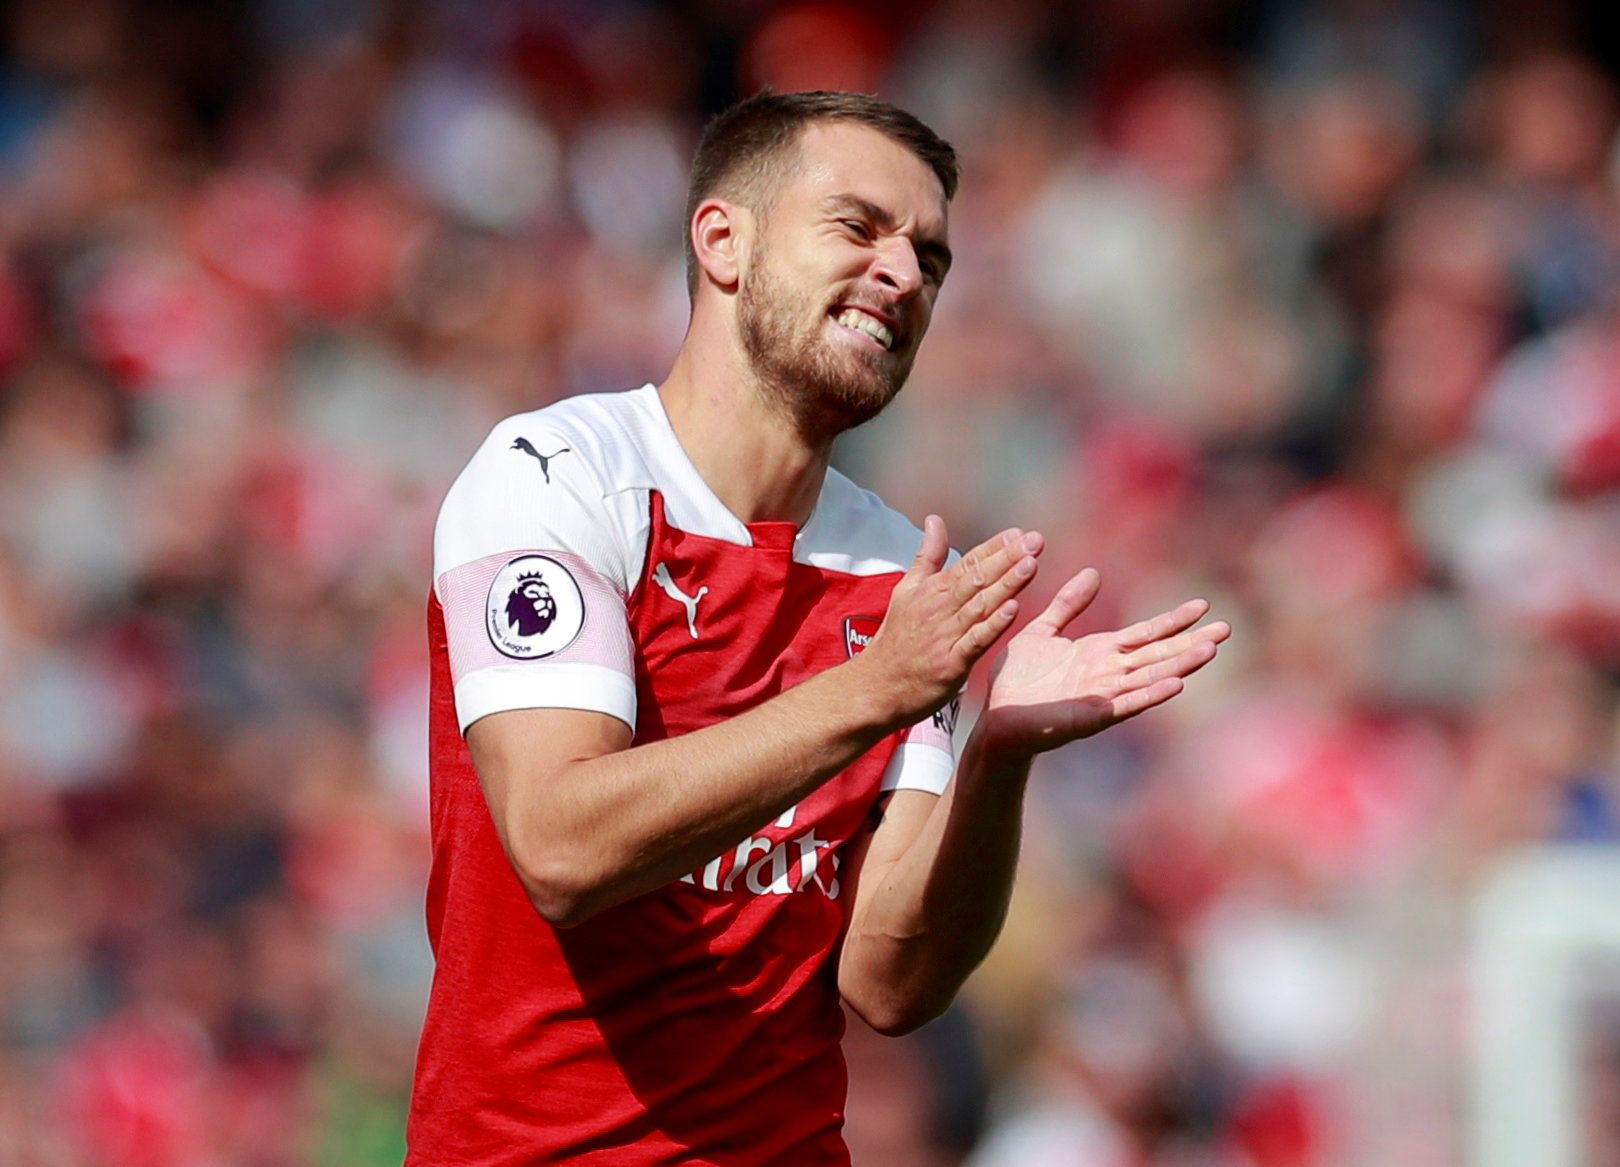 Soccer Football - Premier League - Arsenal v West Ham United - Emirates Stadium, London, Britain - August 25, 2018  Arsenal's Aaron Ramsey reacts  Action Images via Reuters/Andrew Couldridge  EDITORIAL USE ONLY. No use with unauthorized audio, video, data, fixture lists, club/league logos or 